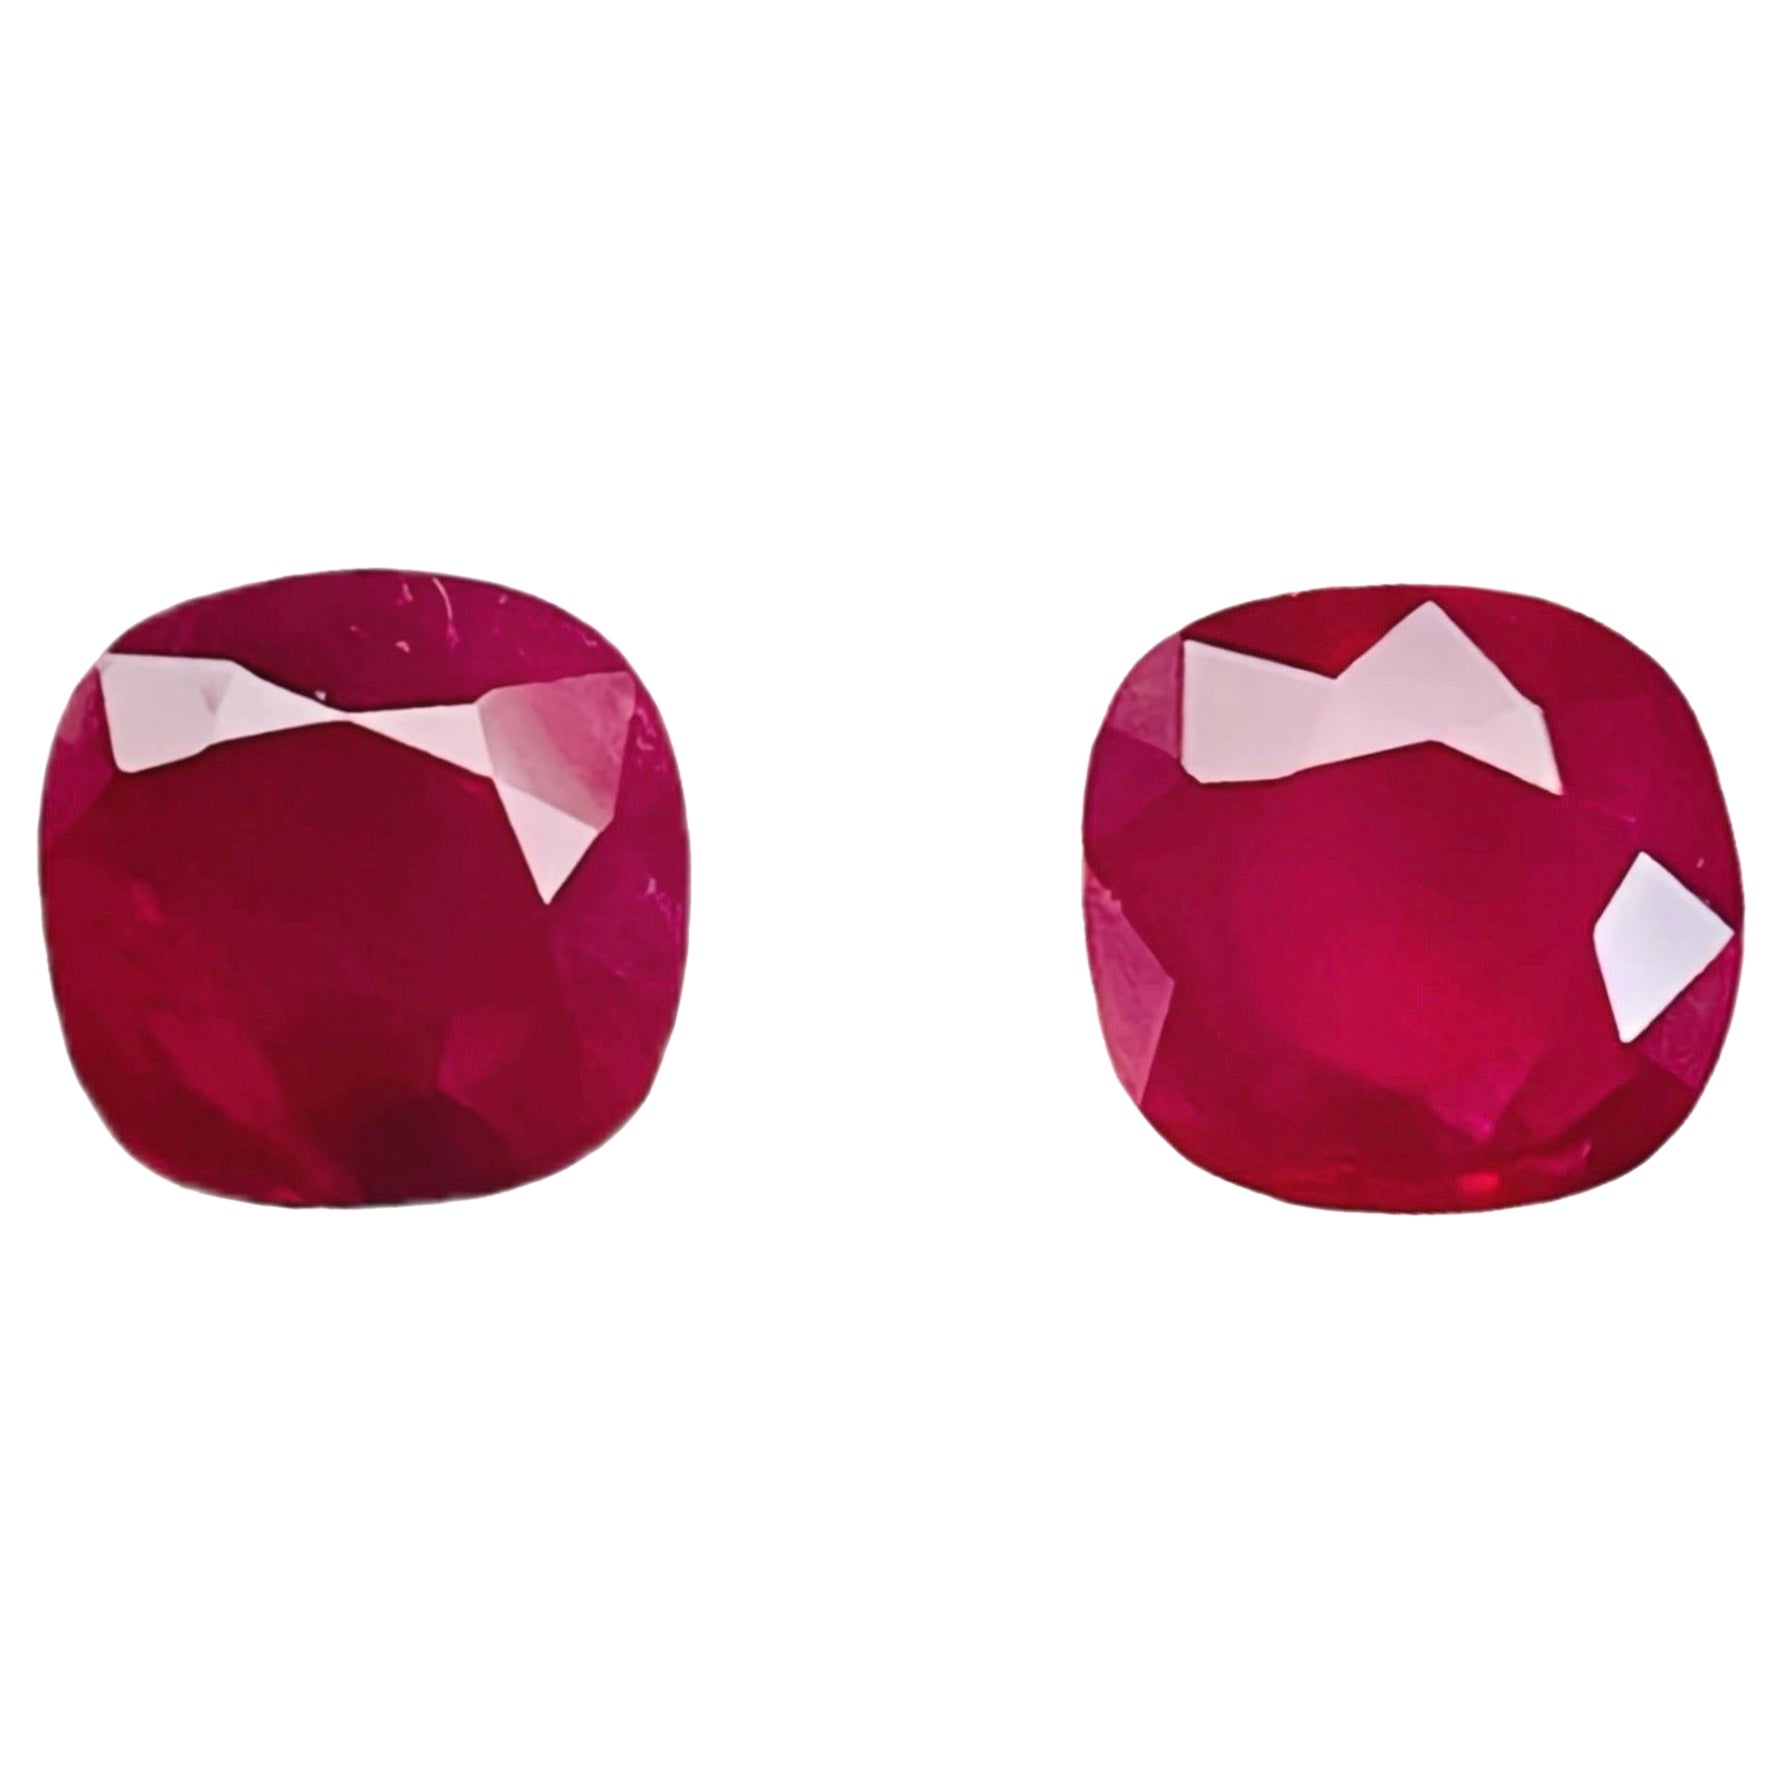 Rare pair 2.06ct burma ruby unheated pigeon blood color GIA AIGS certificate  For Sale